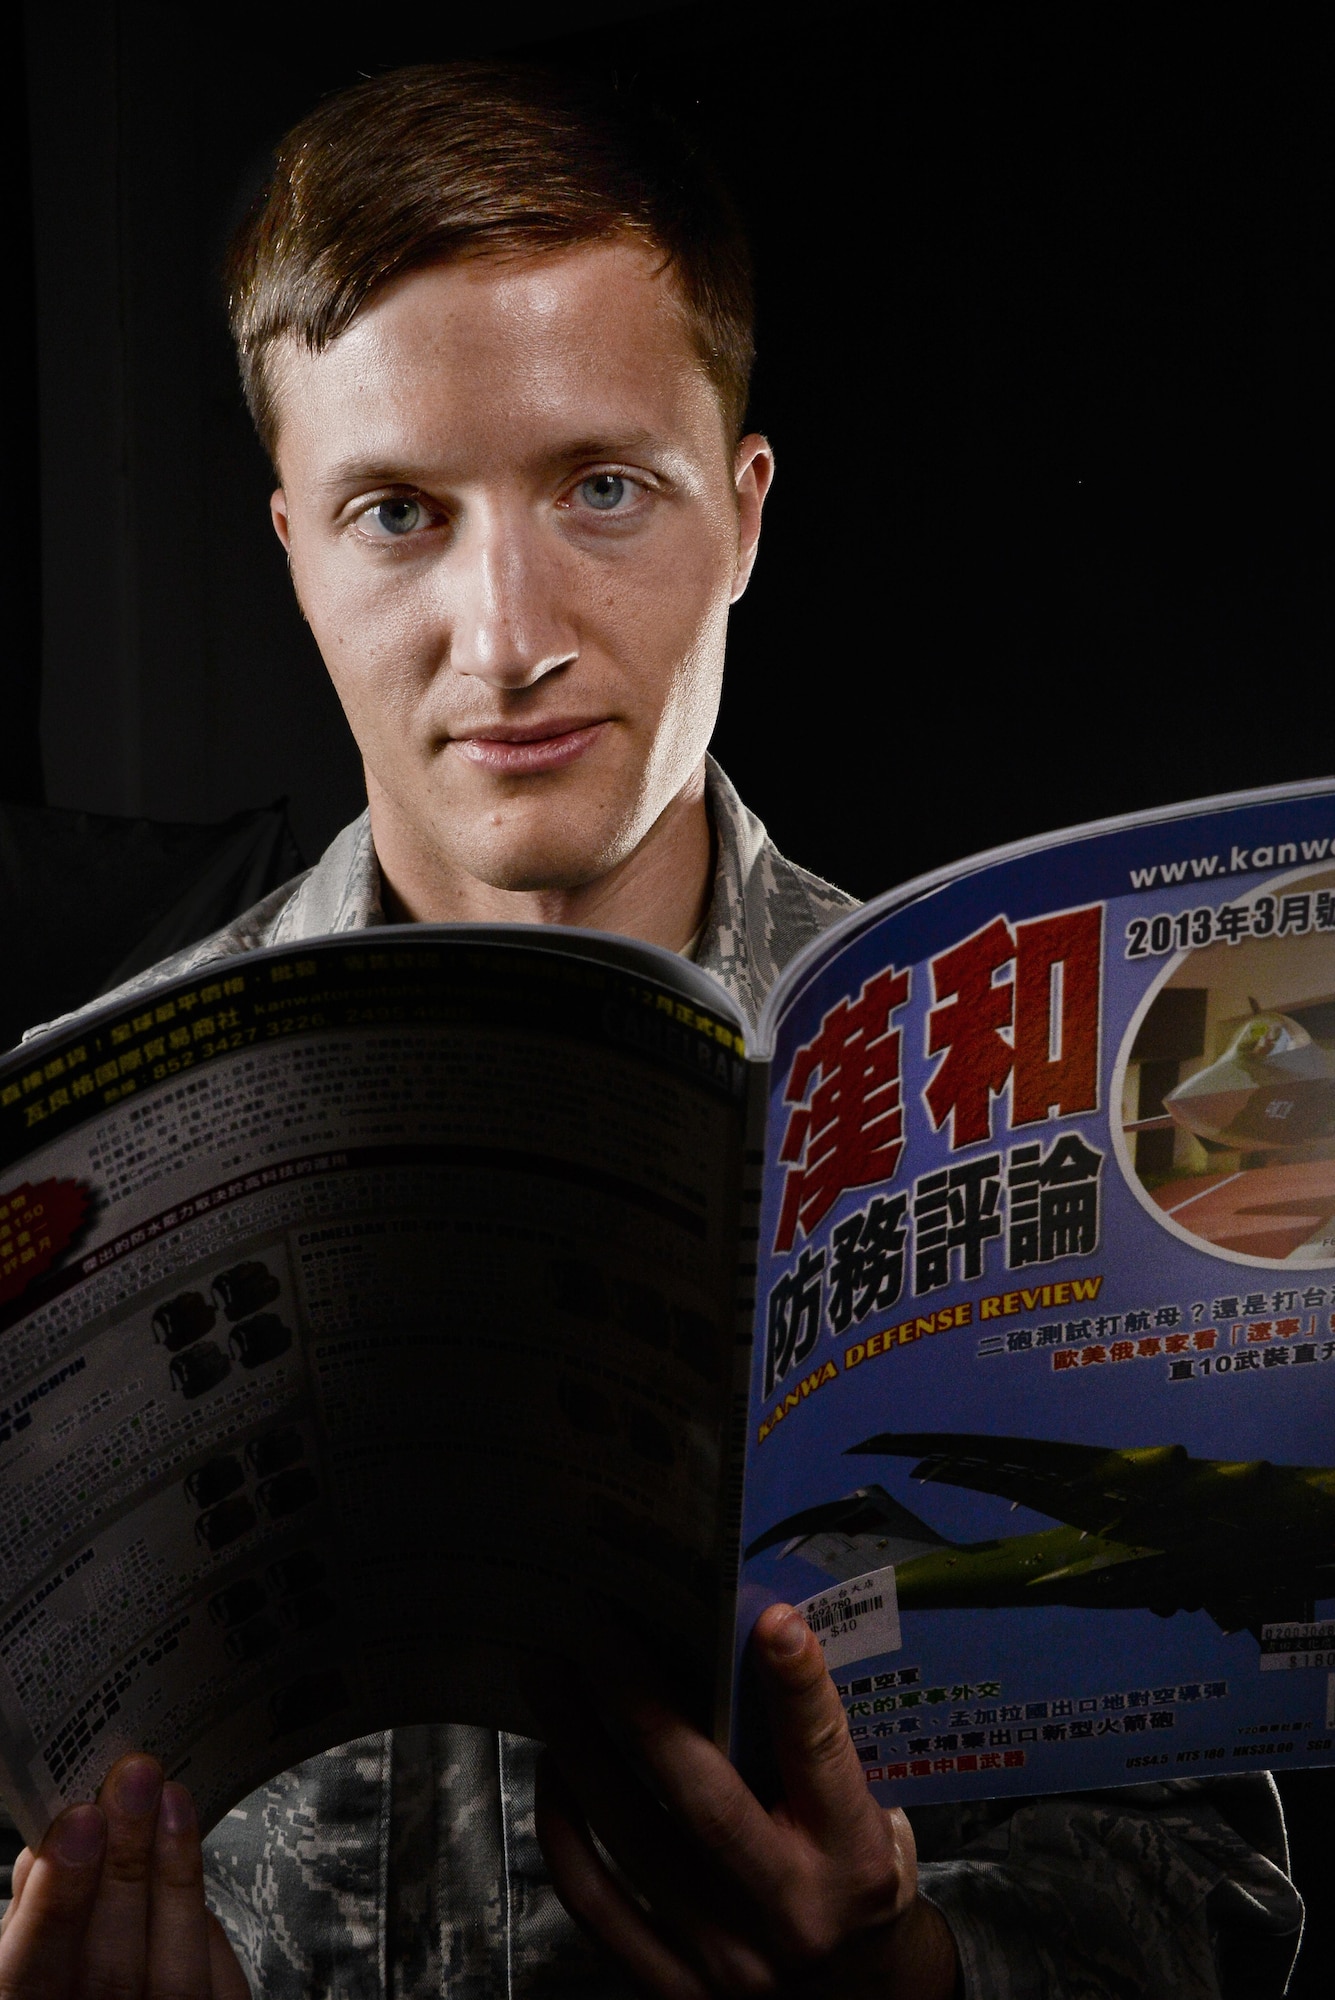 Tech. Sgt. Abraham, an Airborne Cryptologic Language Analyst with the 70th Operations Support Squadron, recently earned a Listening 4, Reading 4 and Speaking 3 on the Chinese Defense Language Proficiency Test in August 2017. The DLPT system evaluates Airmen’s ability to understand written and/or spoken material presented in a foreign language and their ability to speak a foreign language. (U.S. Air Force photo/Staff Sgt. Alexandre Montes)